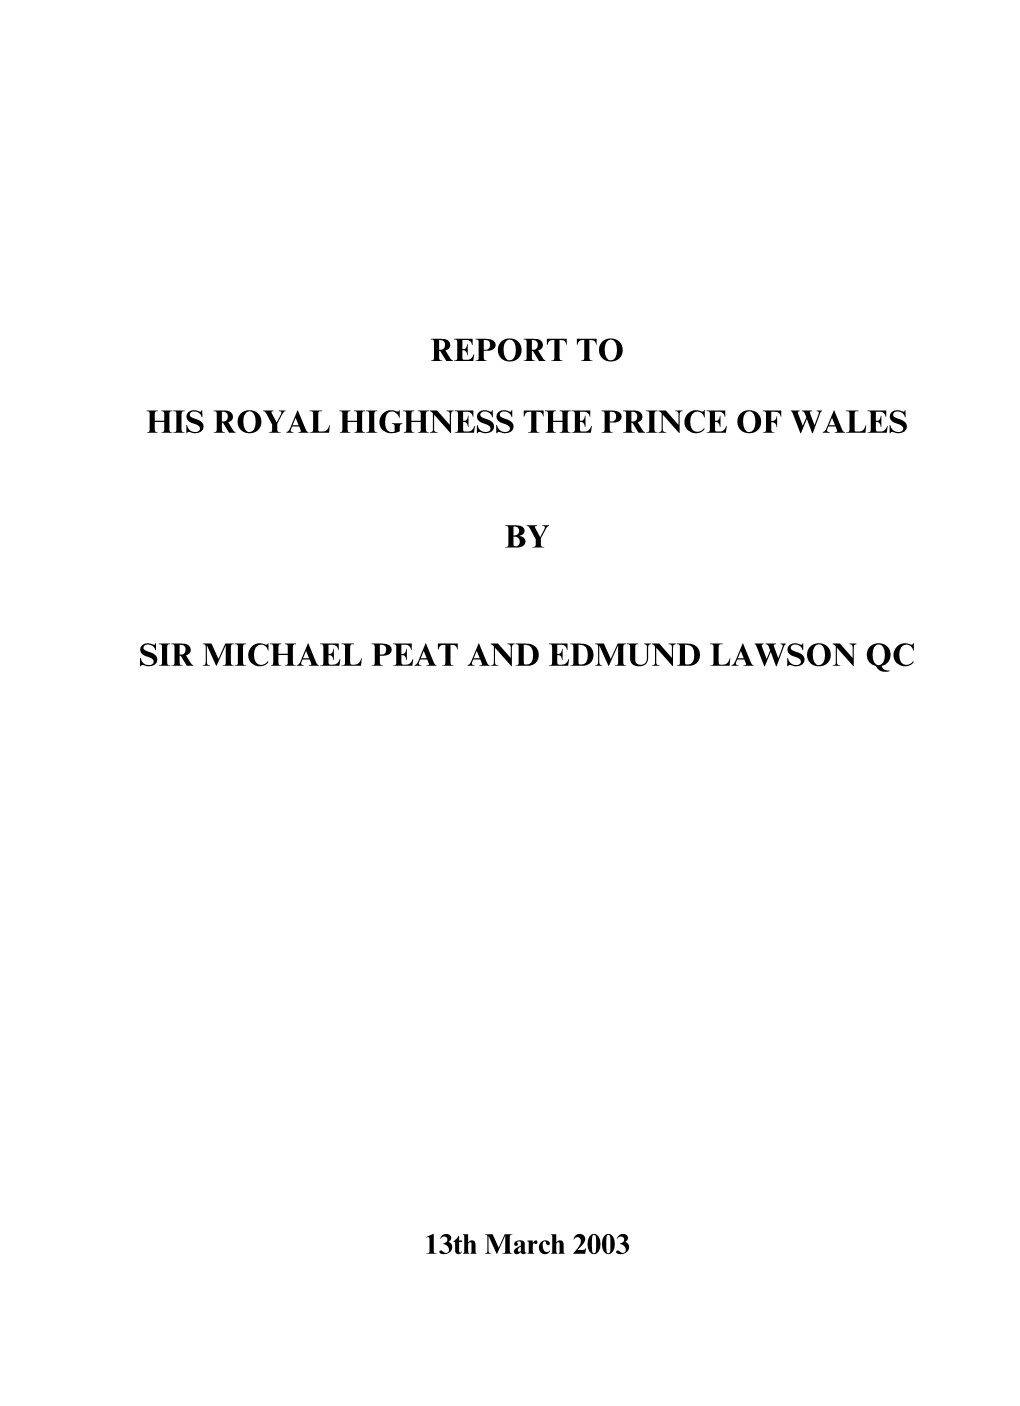 Report to His Royal Highness the Prince of Wales by Sir